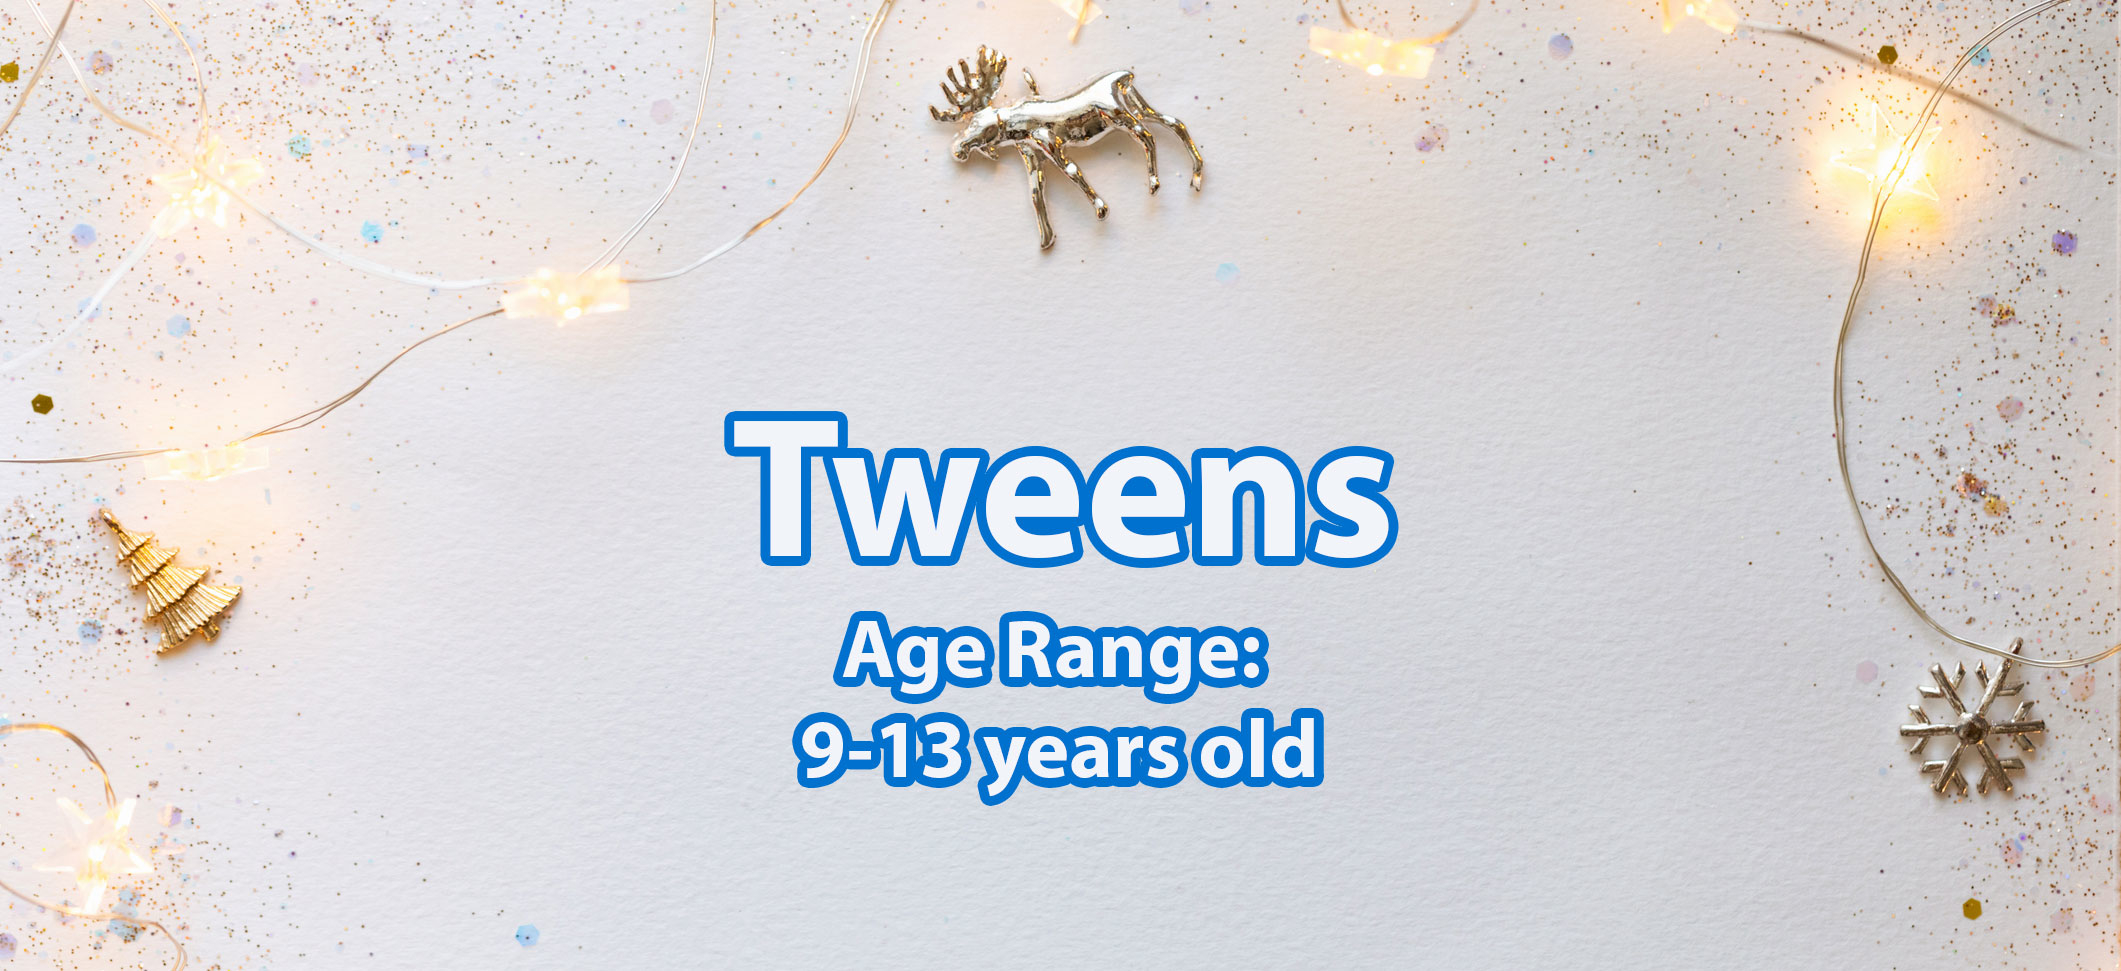 Holiday banner that reads &quot;Tweens Age Range 9-13 years old&quot;